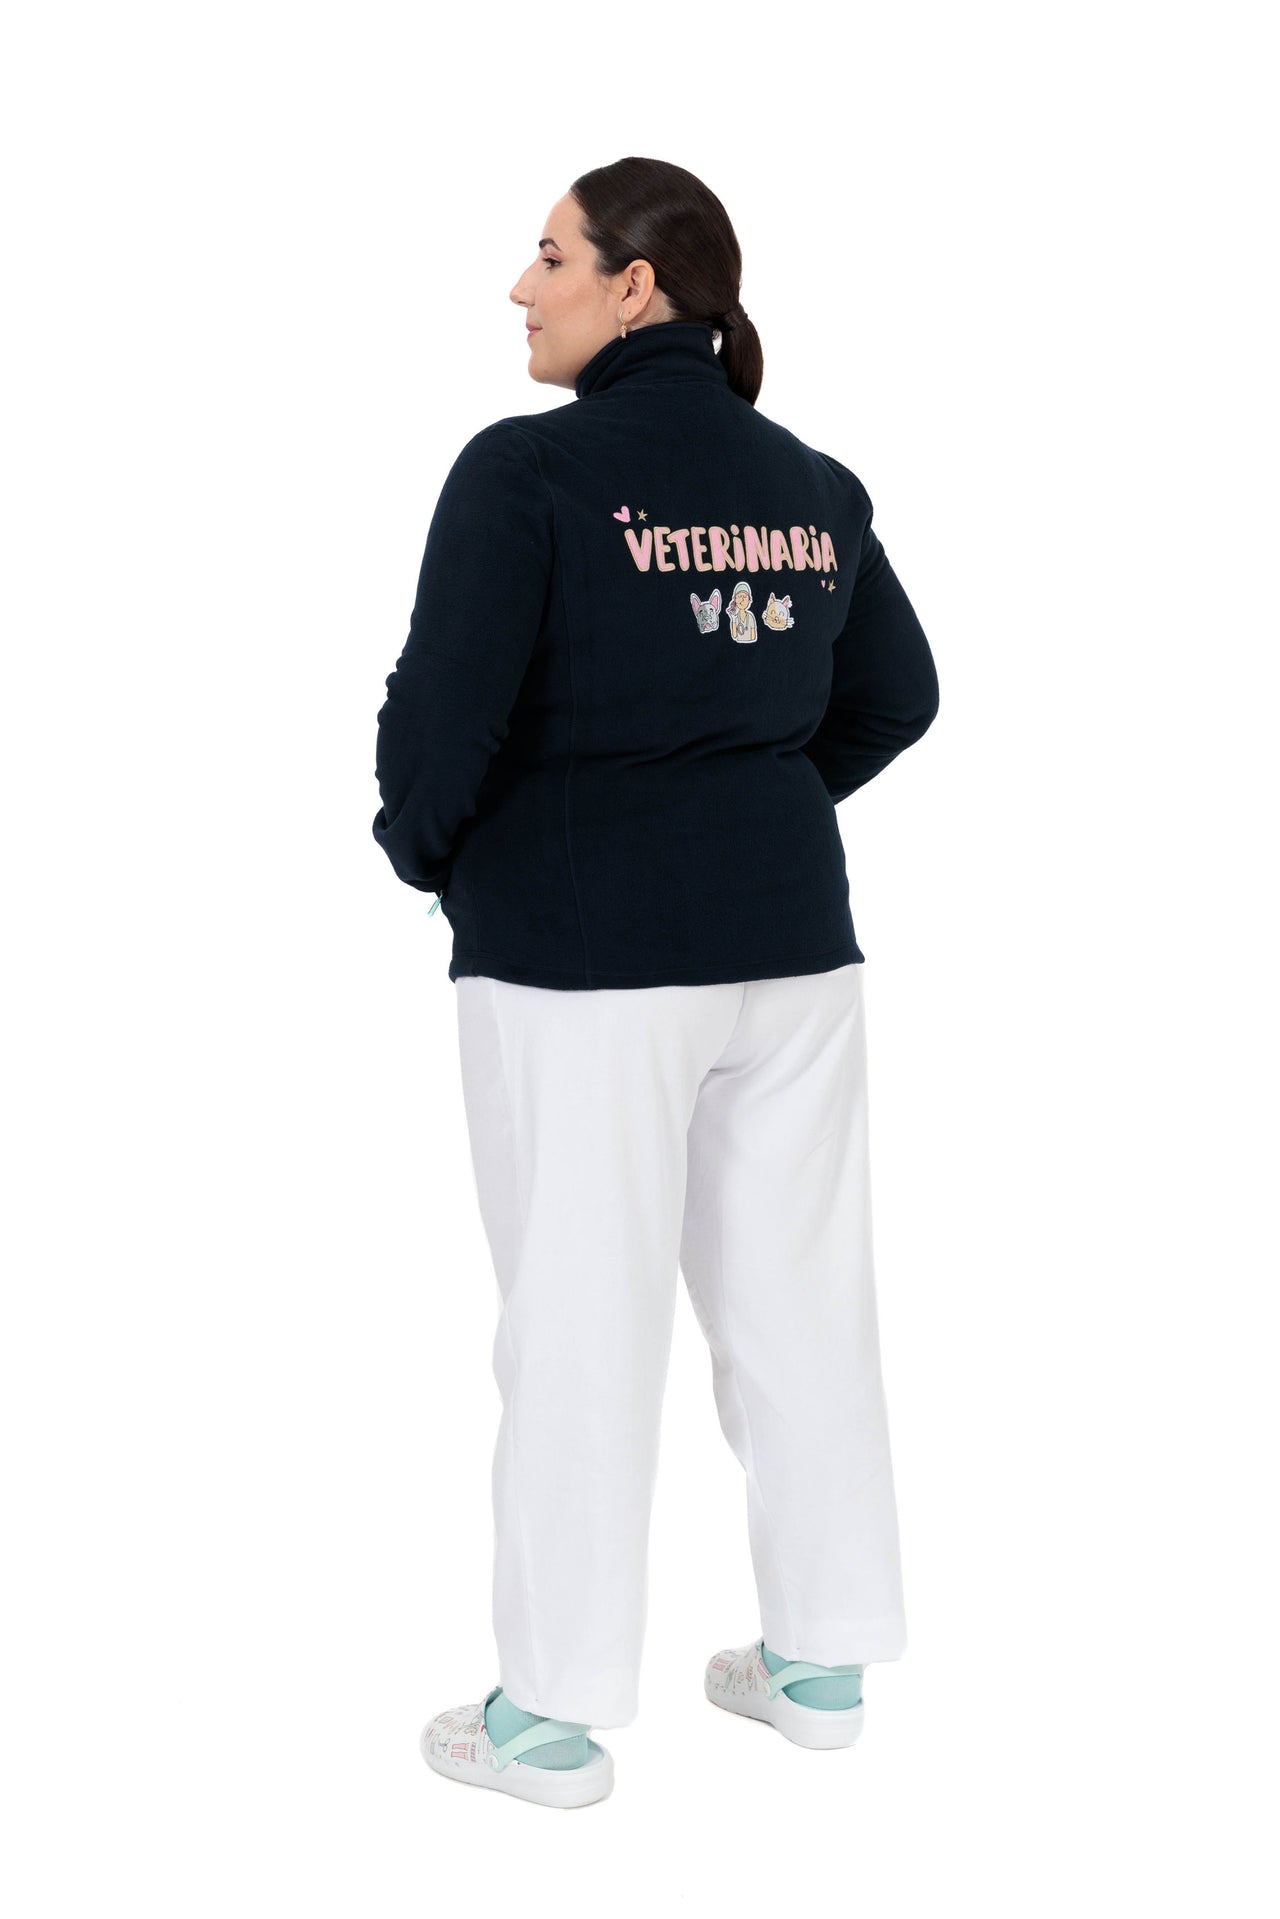 FLEECE JACKET "VET" - A/W23 (PREORDER, SHIPPING STARTING FROM 16/05/2024)